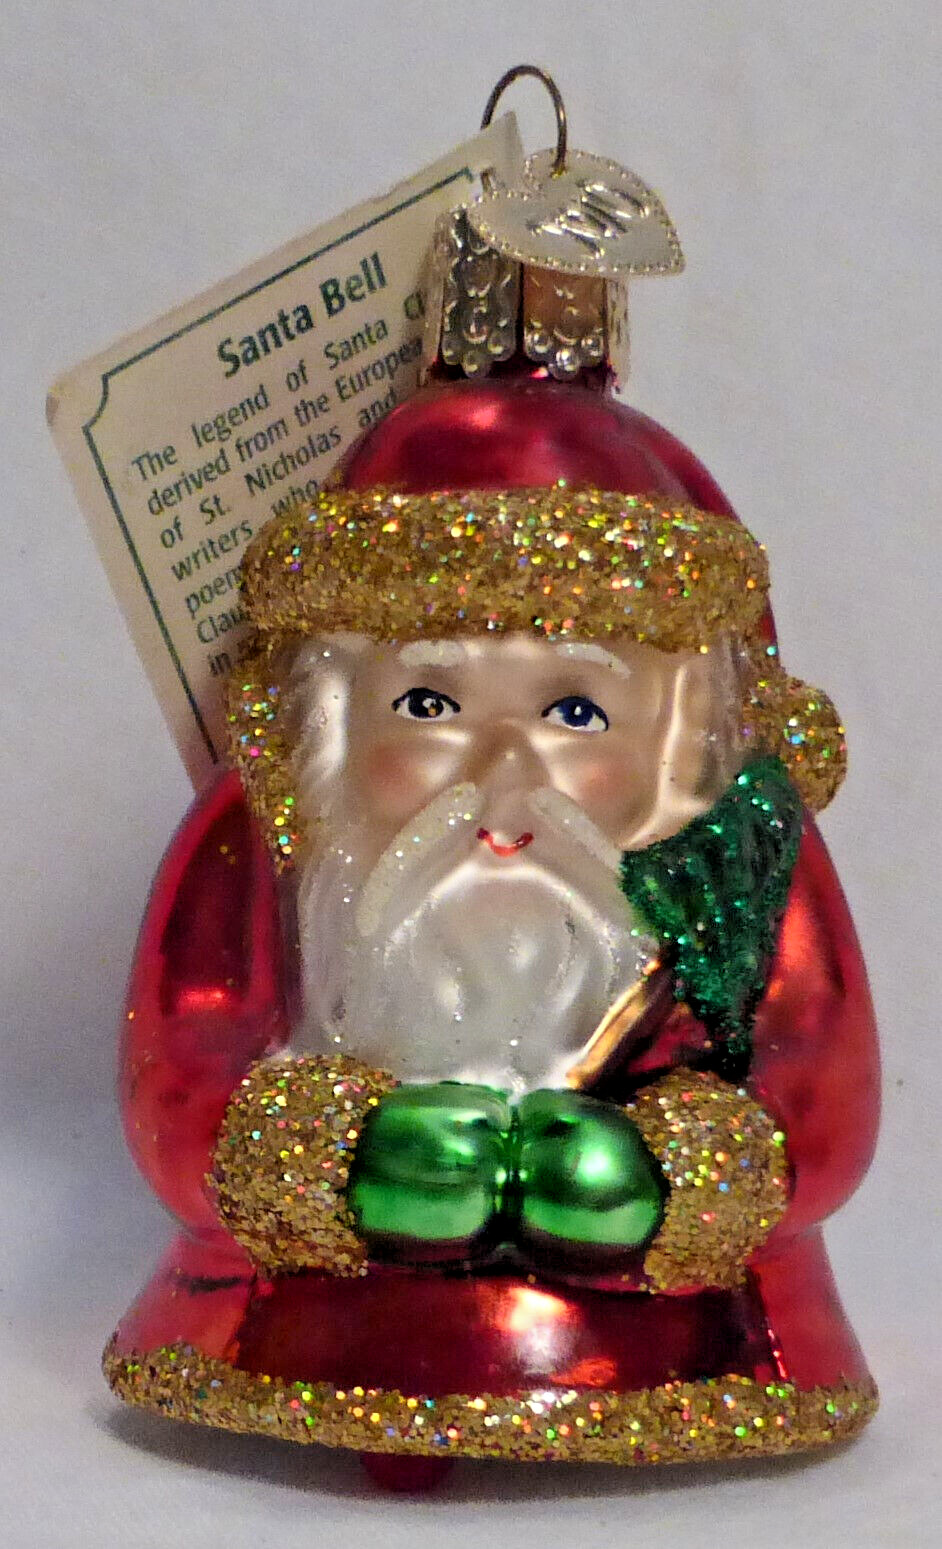 OWC Old World Christmas Blown Glass Santa Bell #40081 ringing in the season